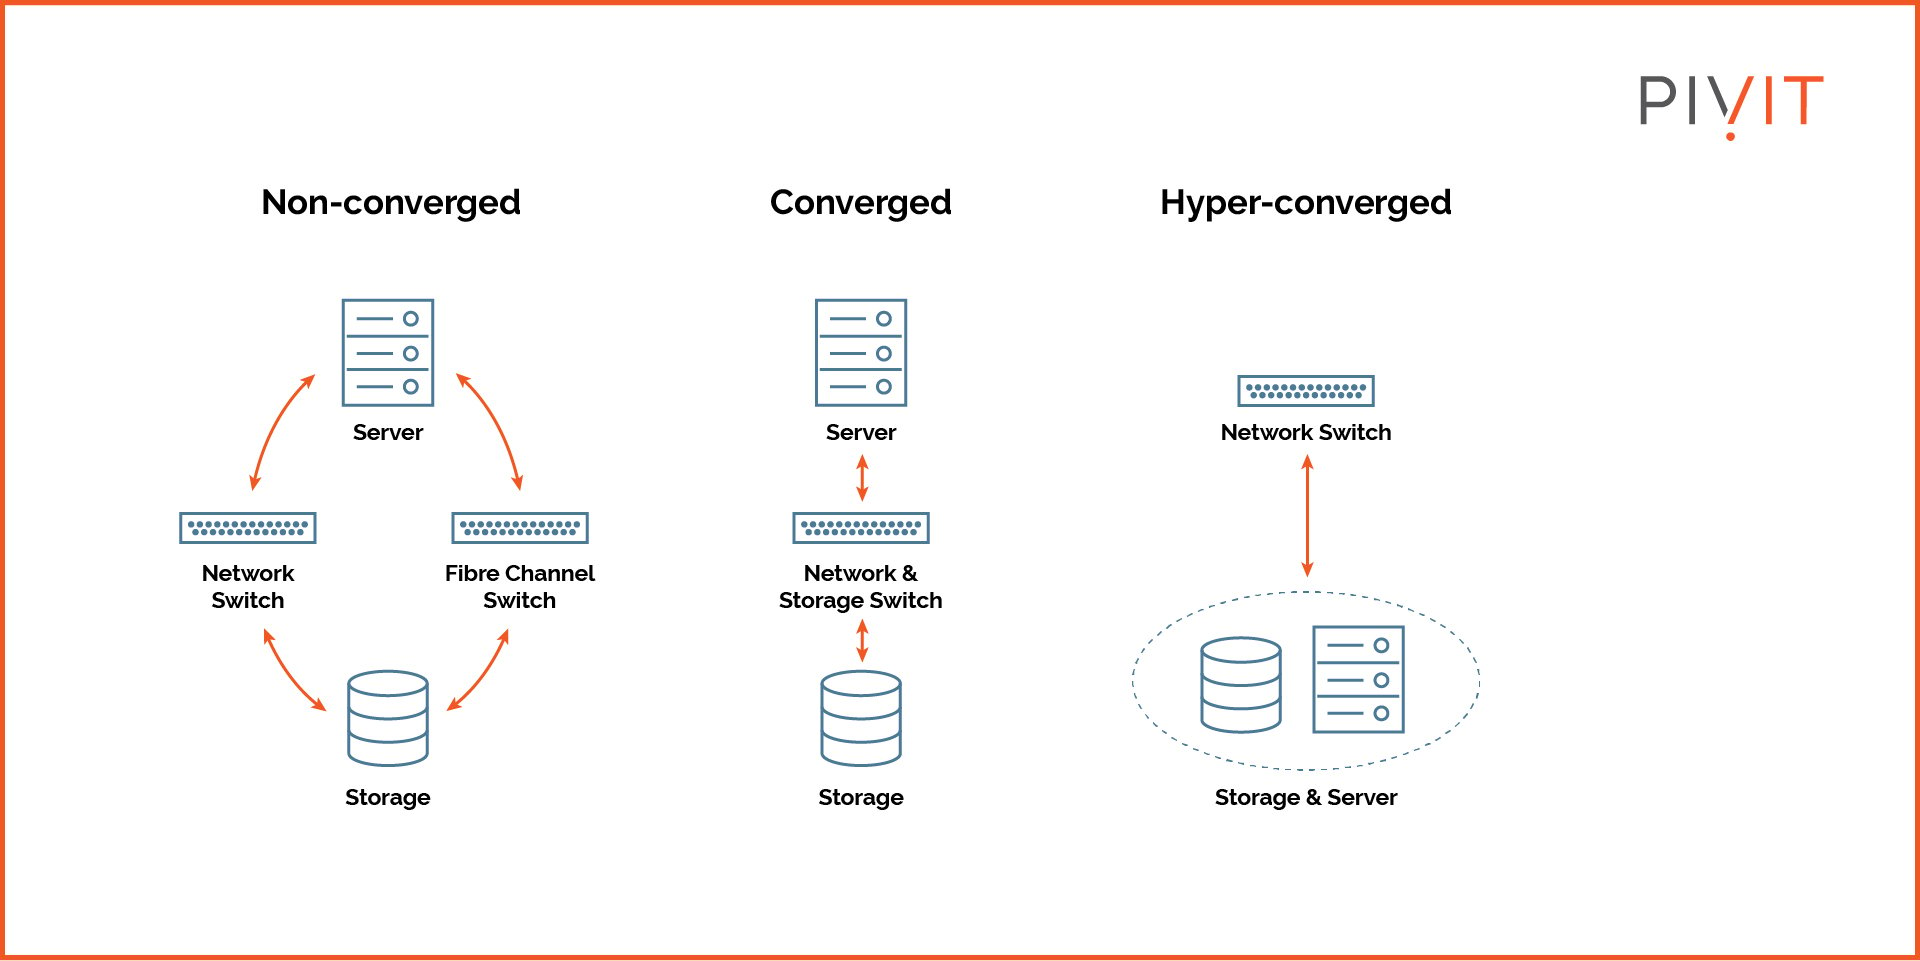 Difference in a non-converged, converged, and hyper-converged network infrastructure